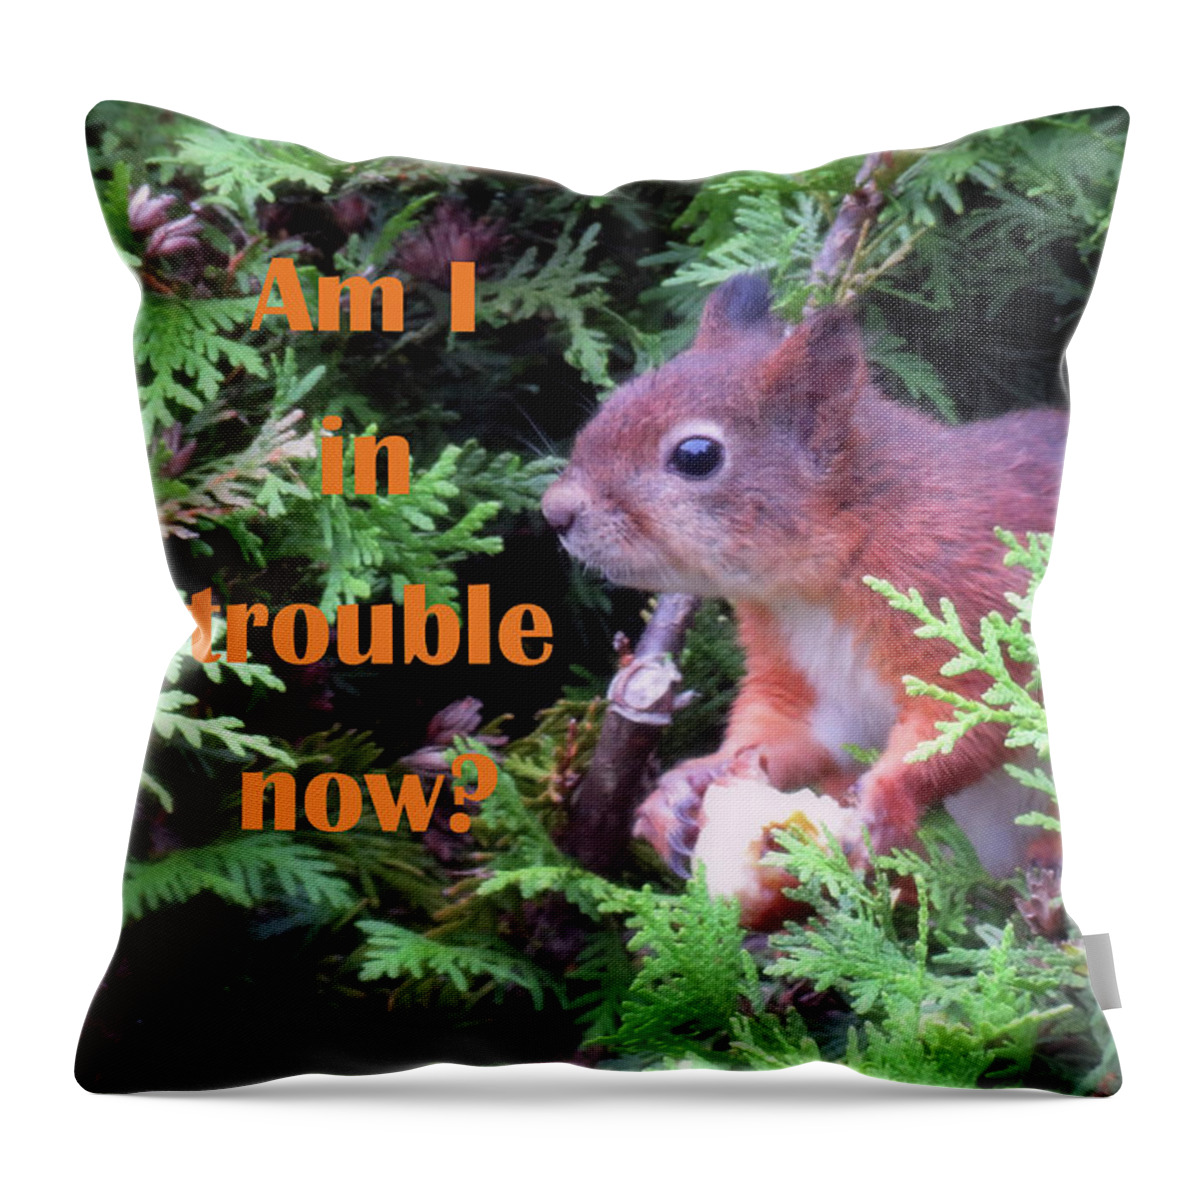 Squirrel Throw Pillow featuring the photograph Am I In Trouble Now Squirrel by Johanna Hurmerinta